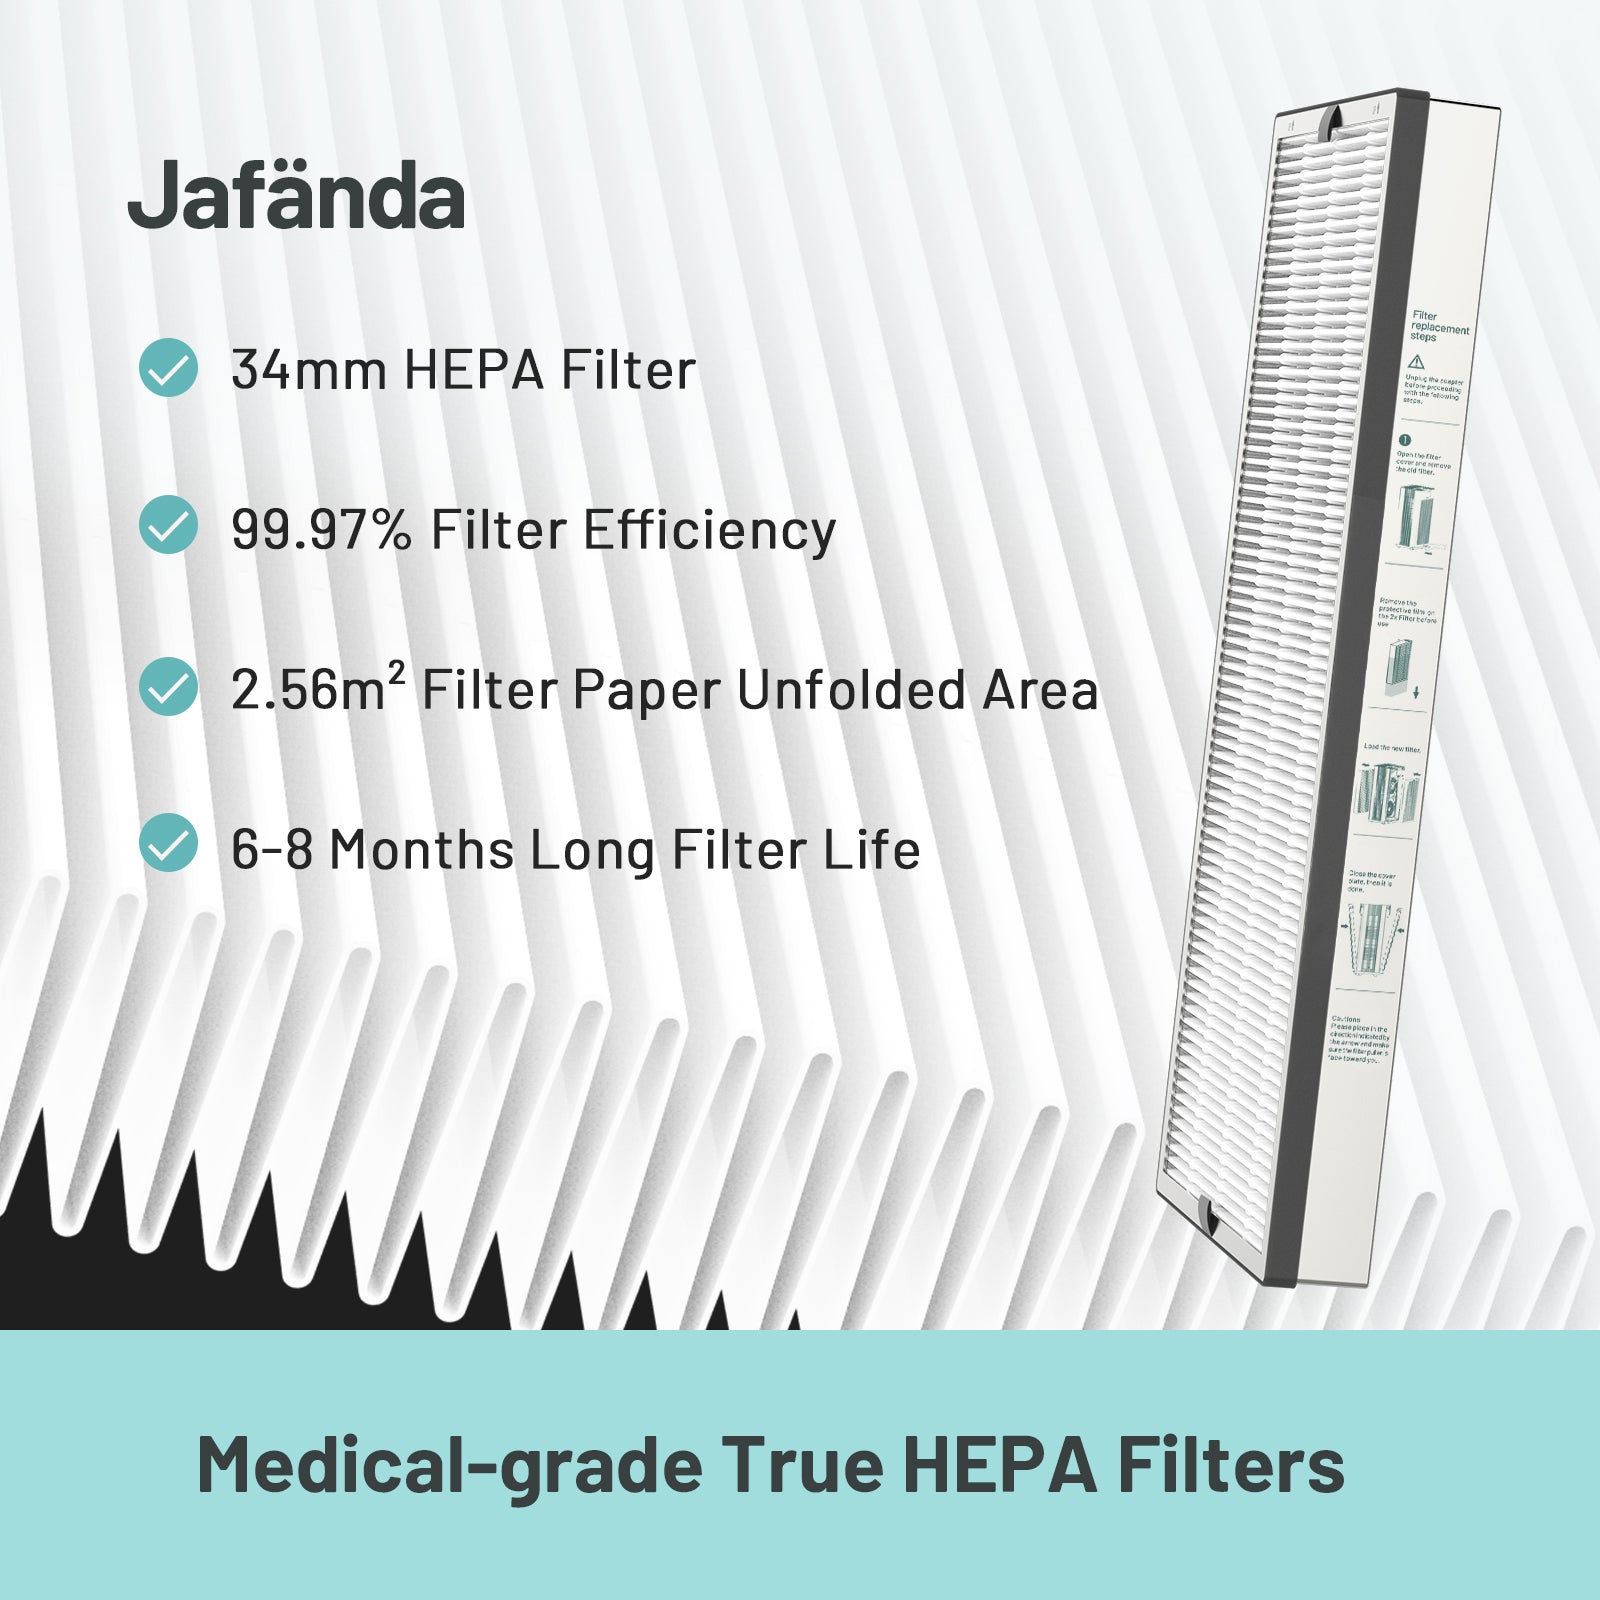 Jafanda JF999 Original FIlter Replacement, 2 Pack 3-in-1 Filters with True HEPA & 3.38 lb Activated Carbon, Removes 99.97% of Smoke, Dust, Pollen and Odors - Jafanda